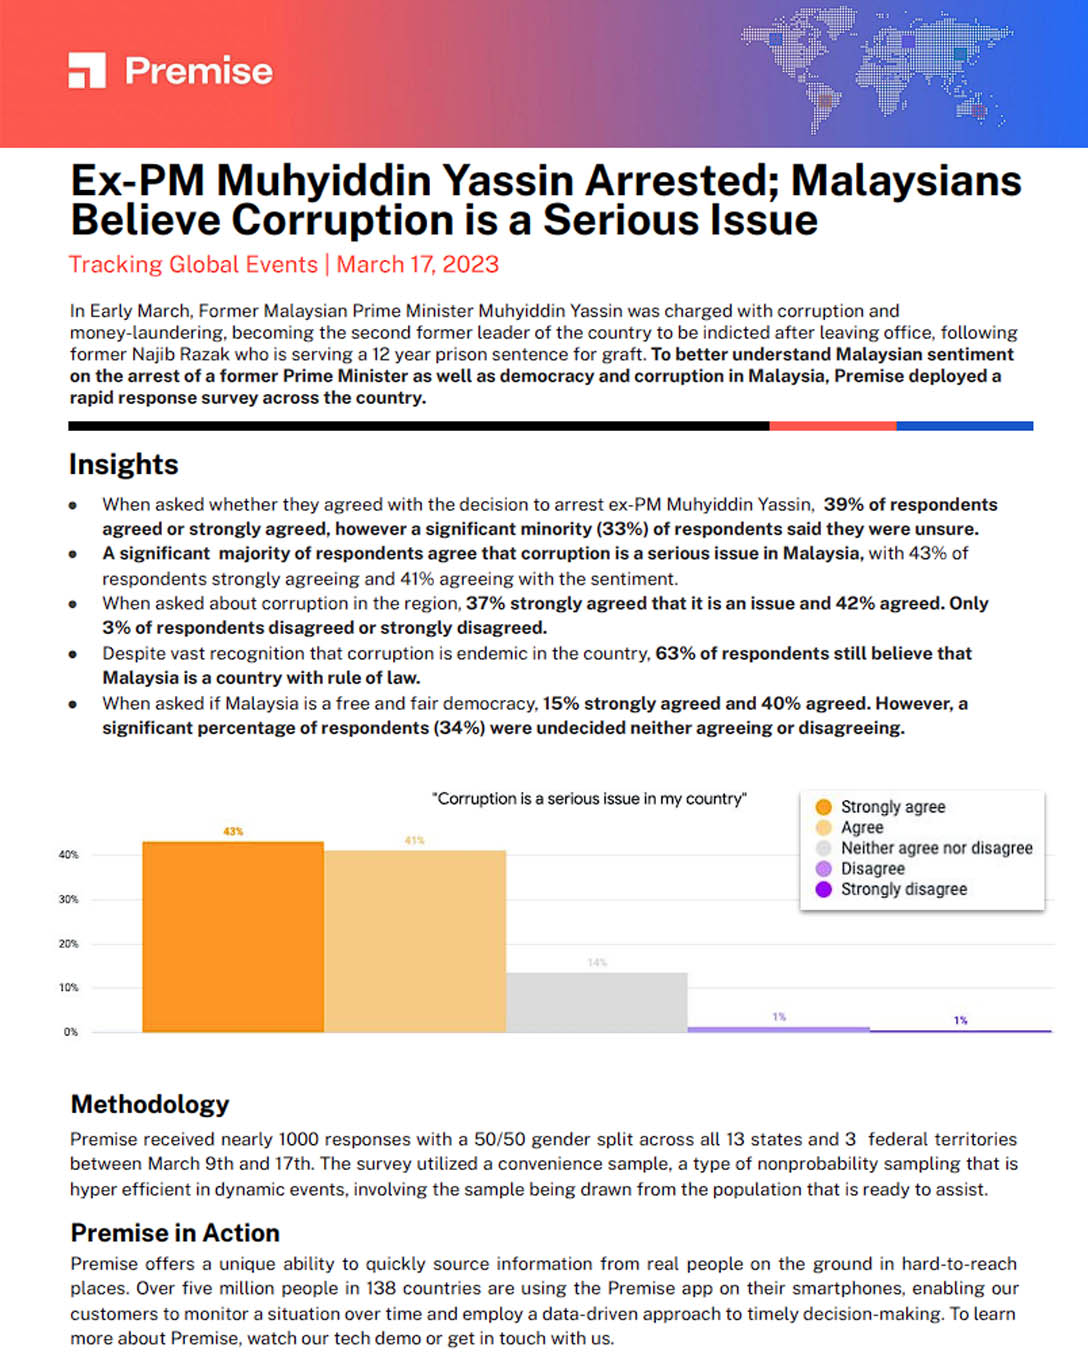 Ex-PM Muhyiddin Yassin Arrested; Malaysians Believe Corruption is a Serious Issue